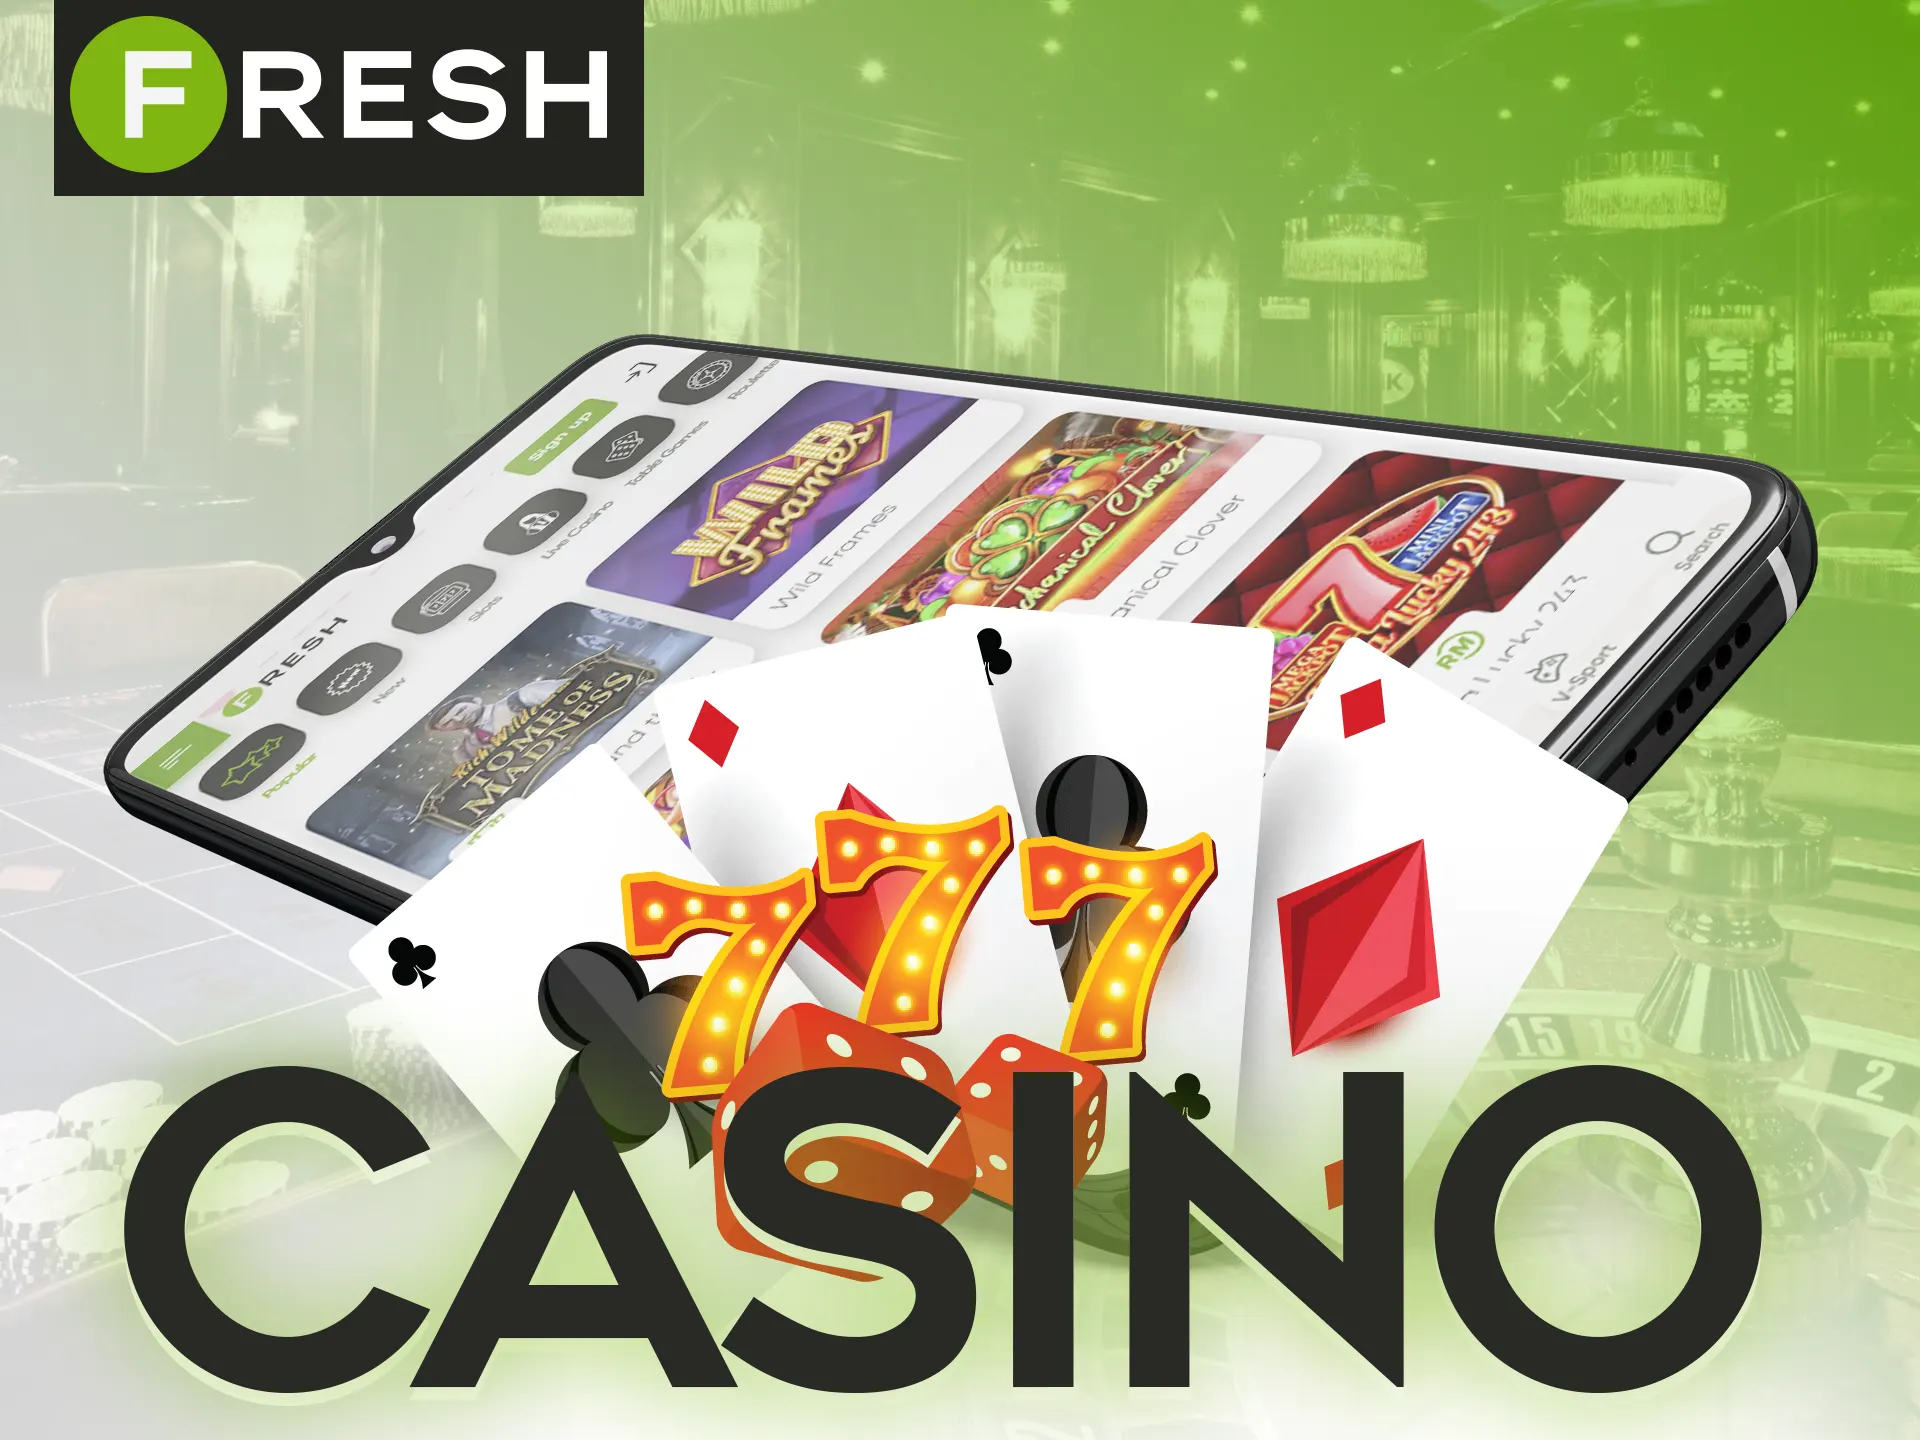 Spend your time in the Fresh Casino casino app.